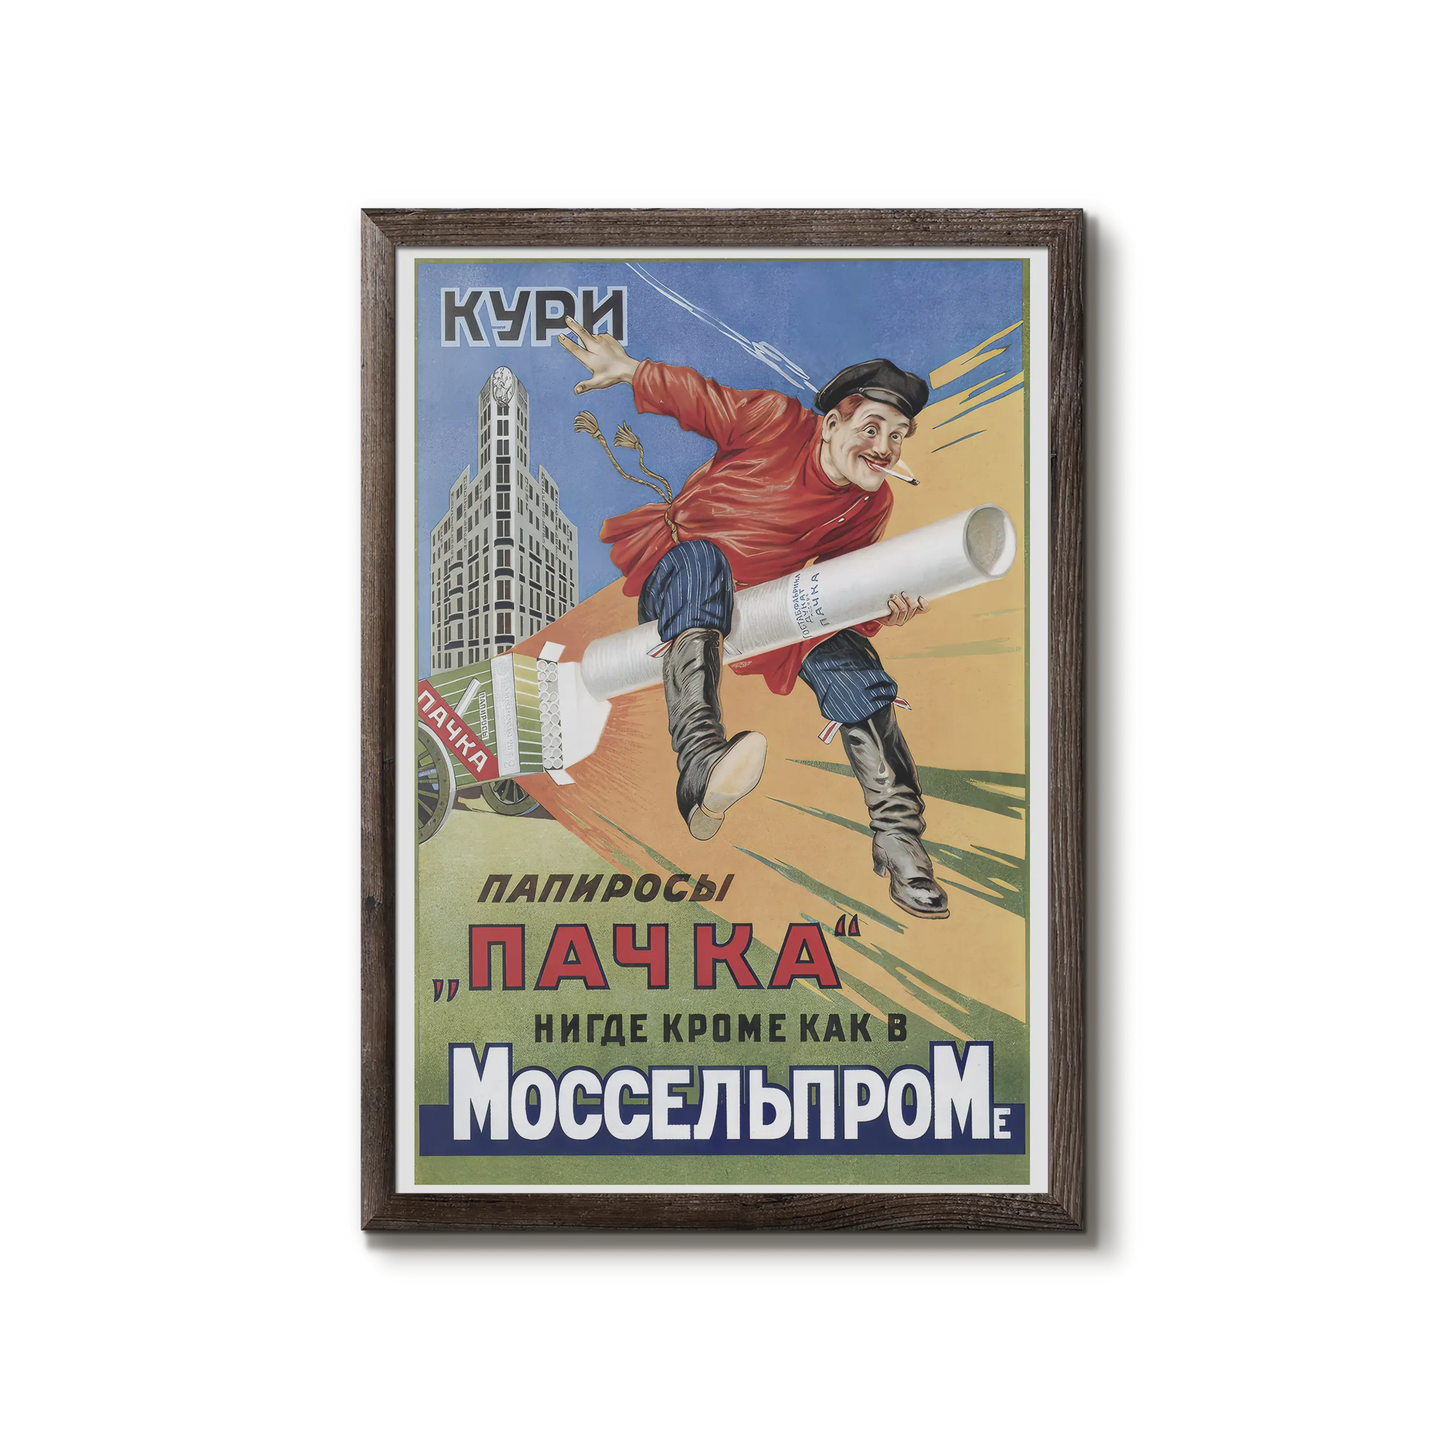 Advertising poster for Russian Pachka cigarettes, 1927